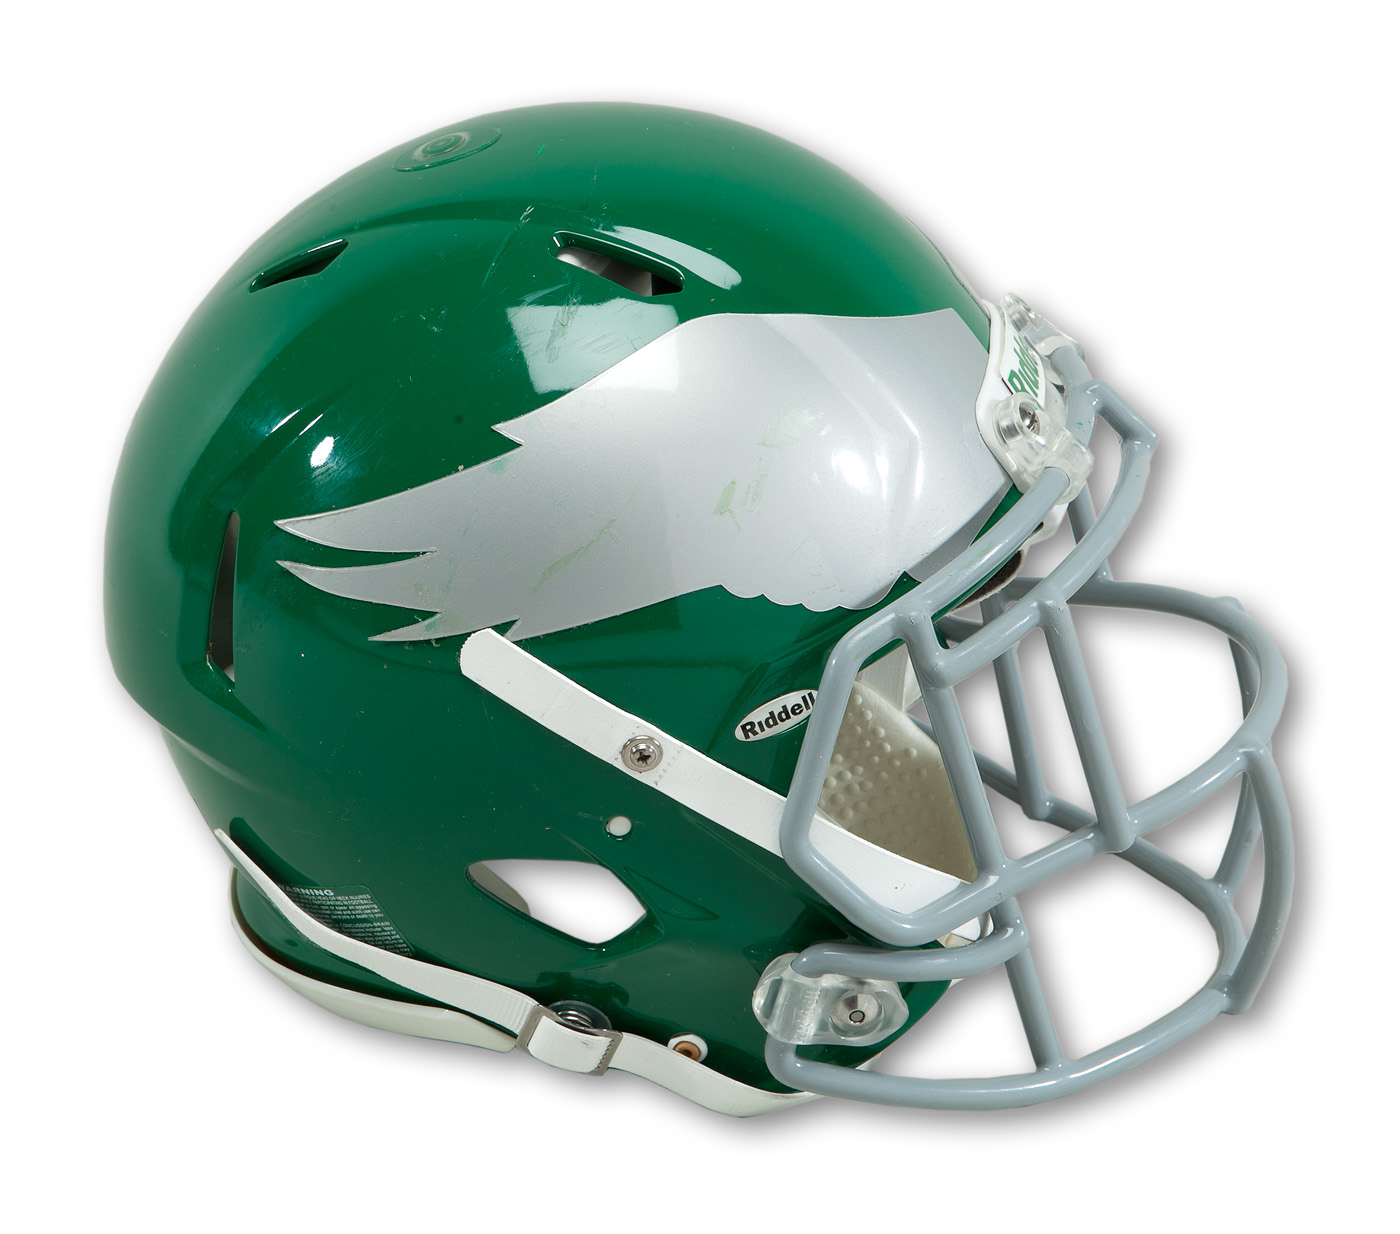 2010: Eagles going green with throwback jerseys for season opener